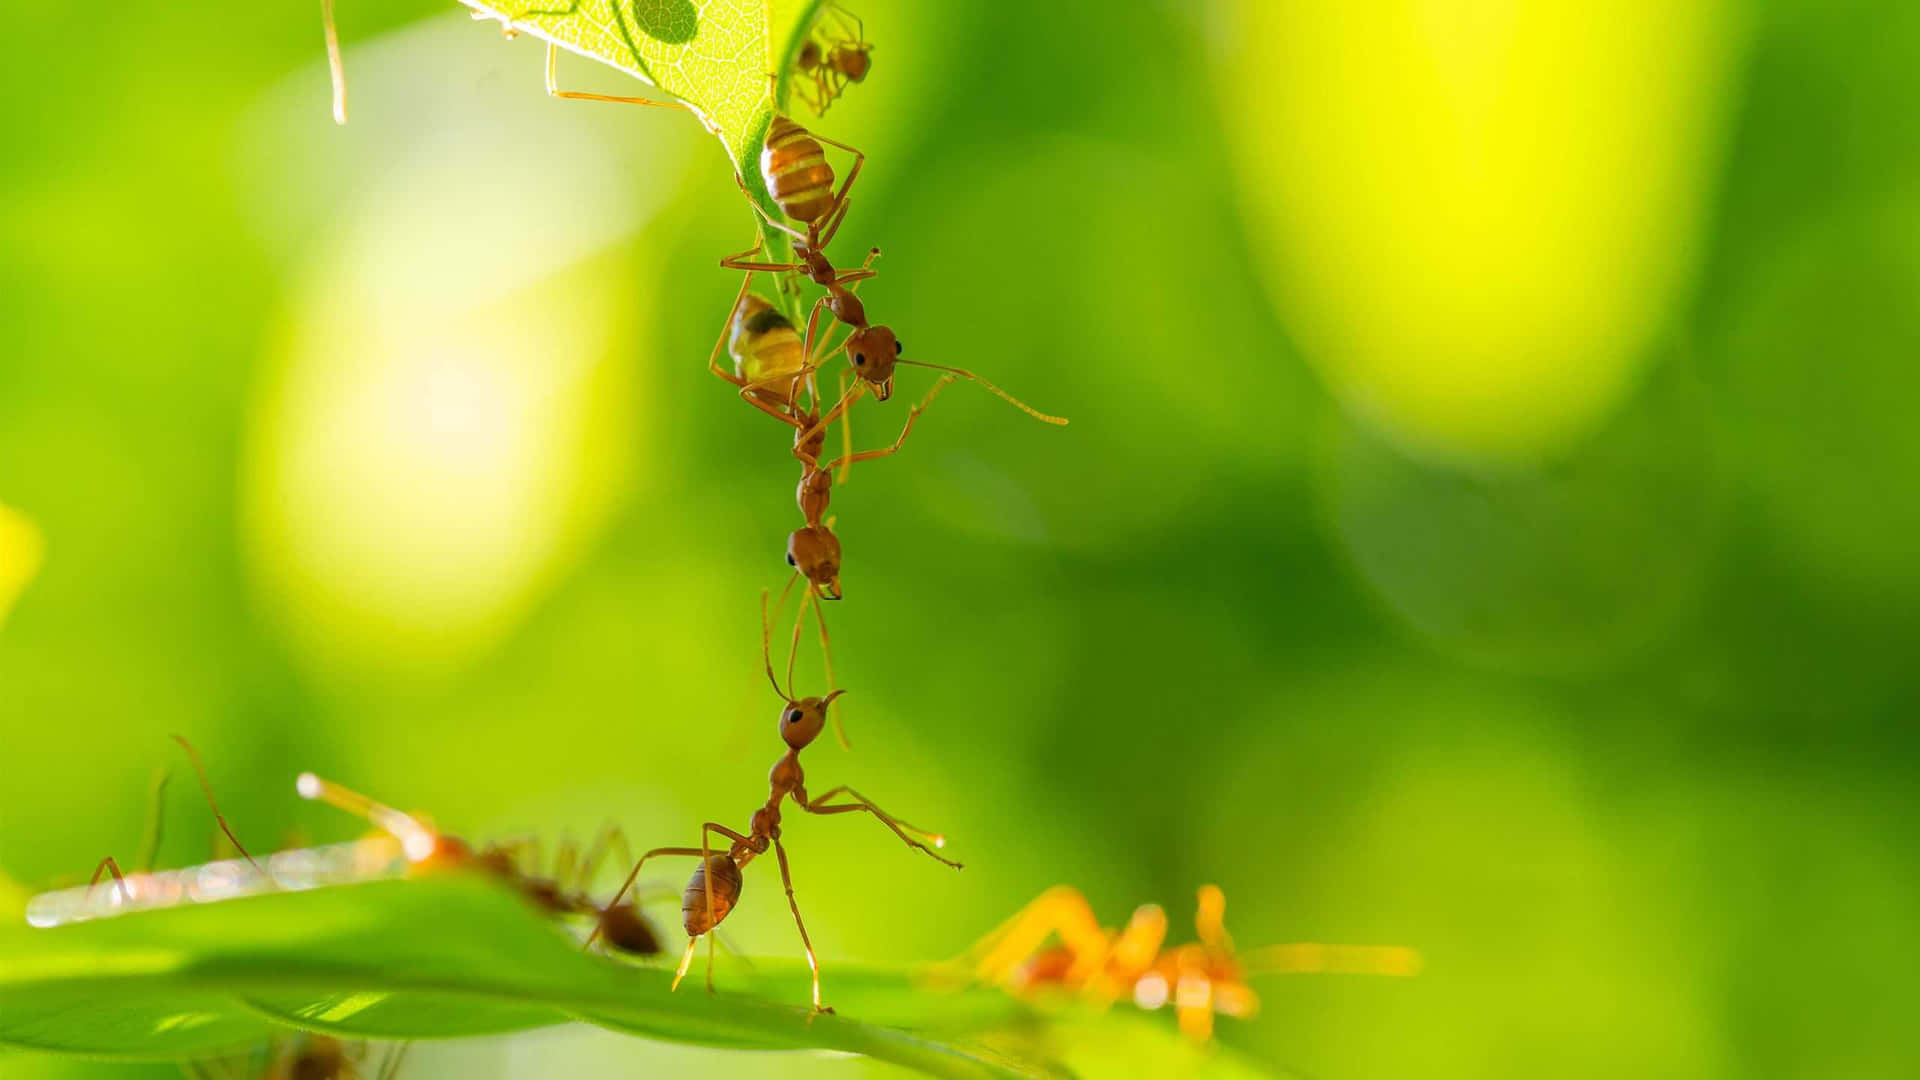 Ants Forming Living Chain Wallpaper